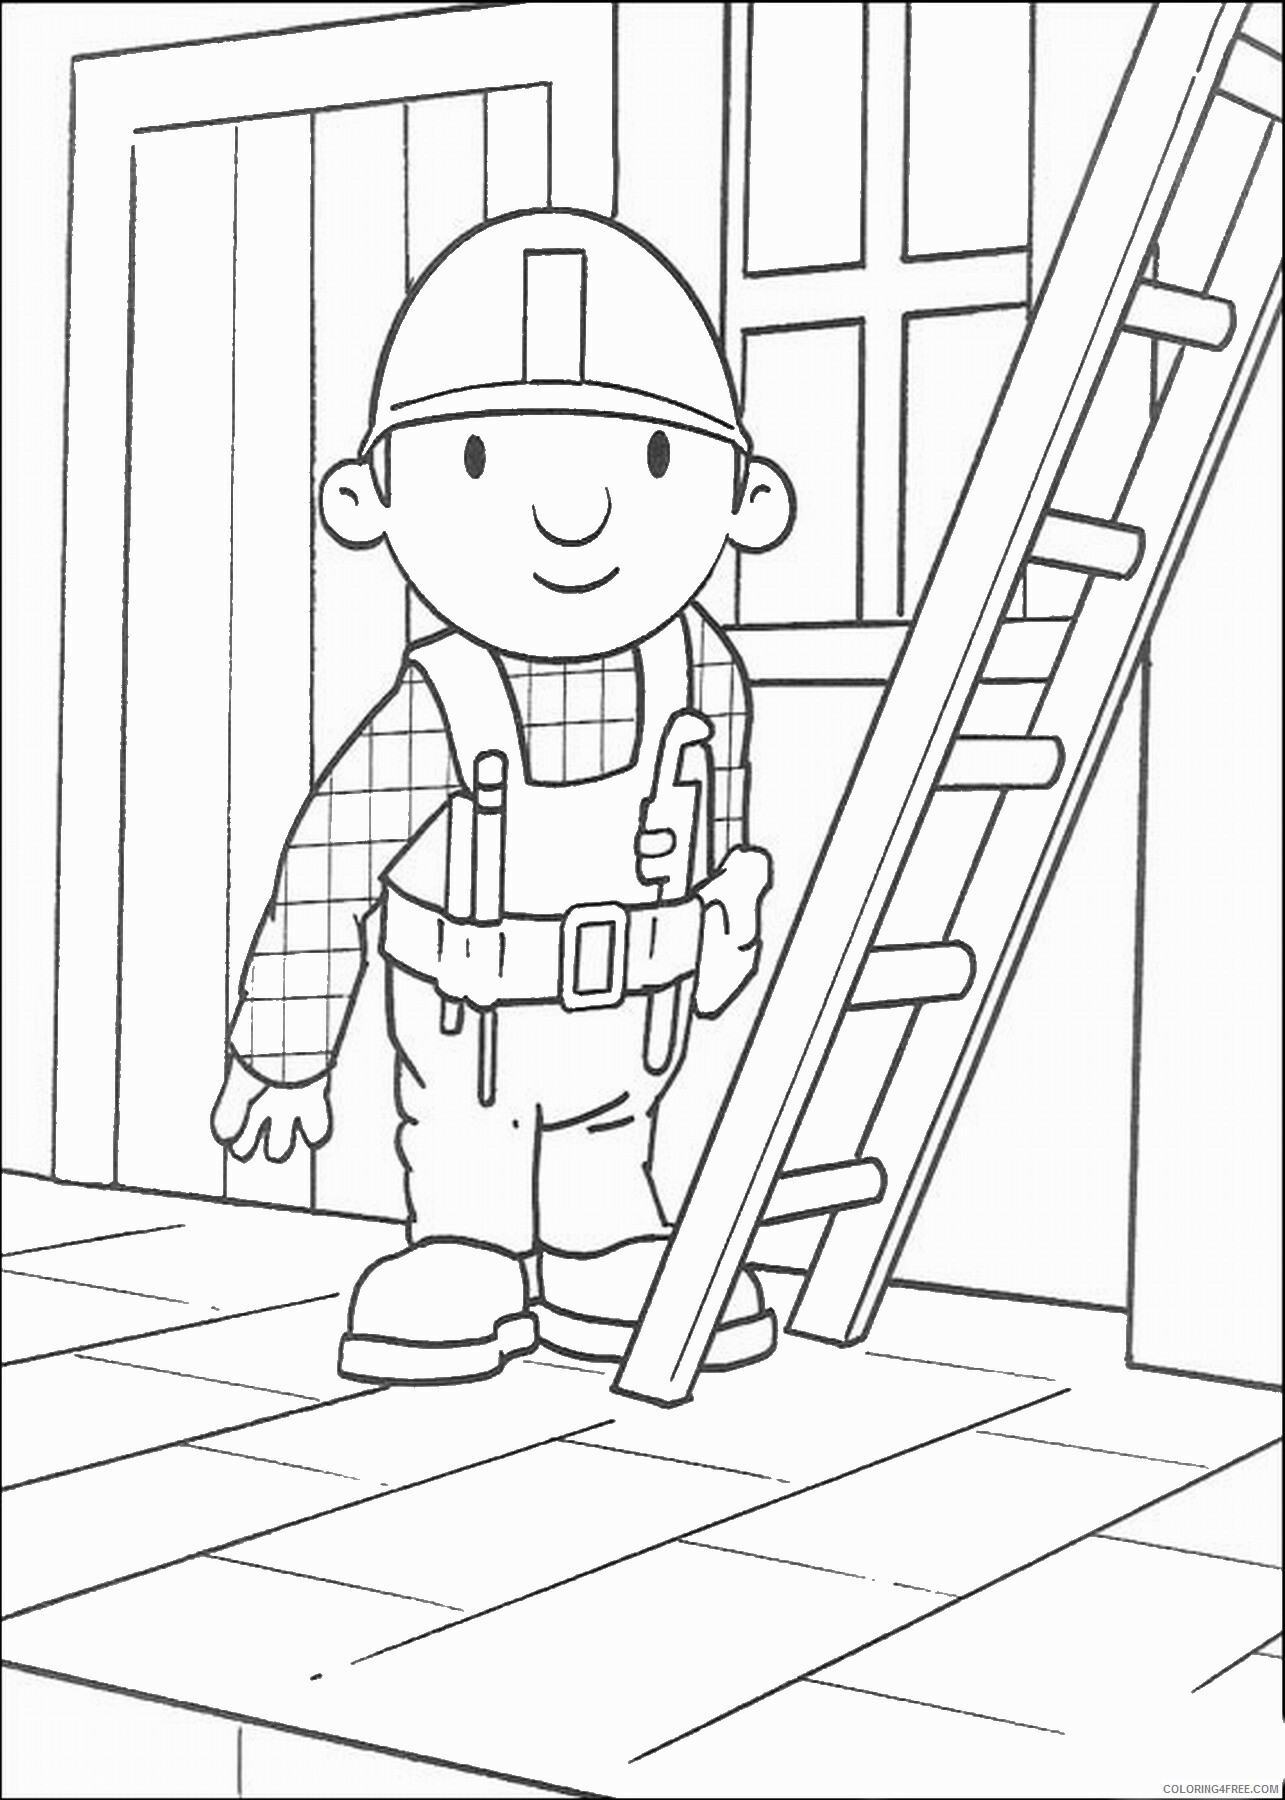 Bob the Builder Coloring Pages TV Film bob the builder_11 Printable 2020 00961 Coloring4free